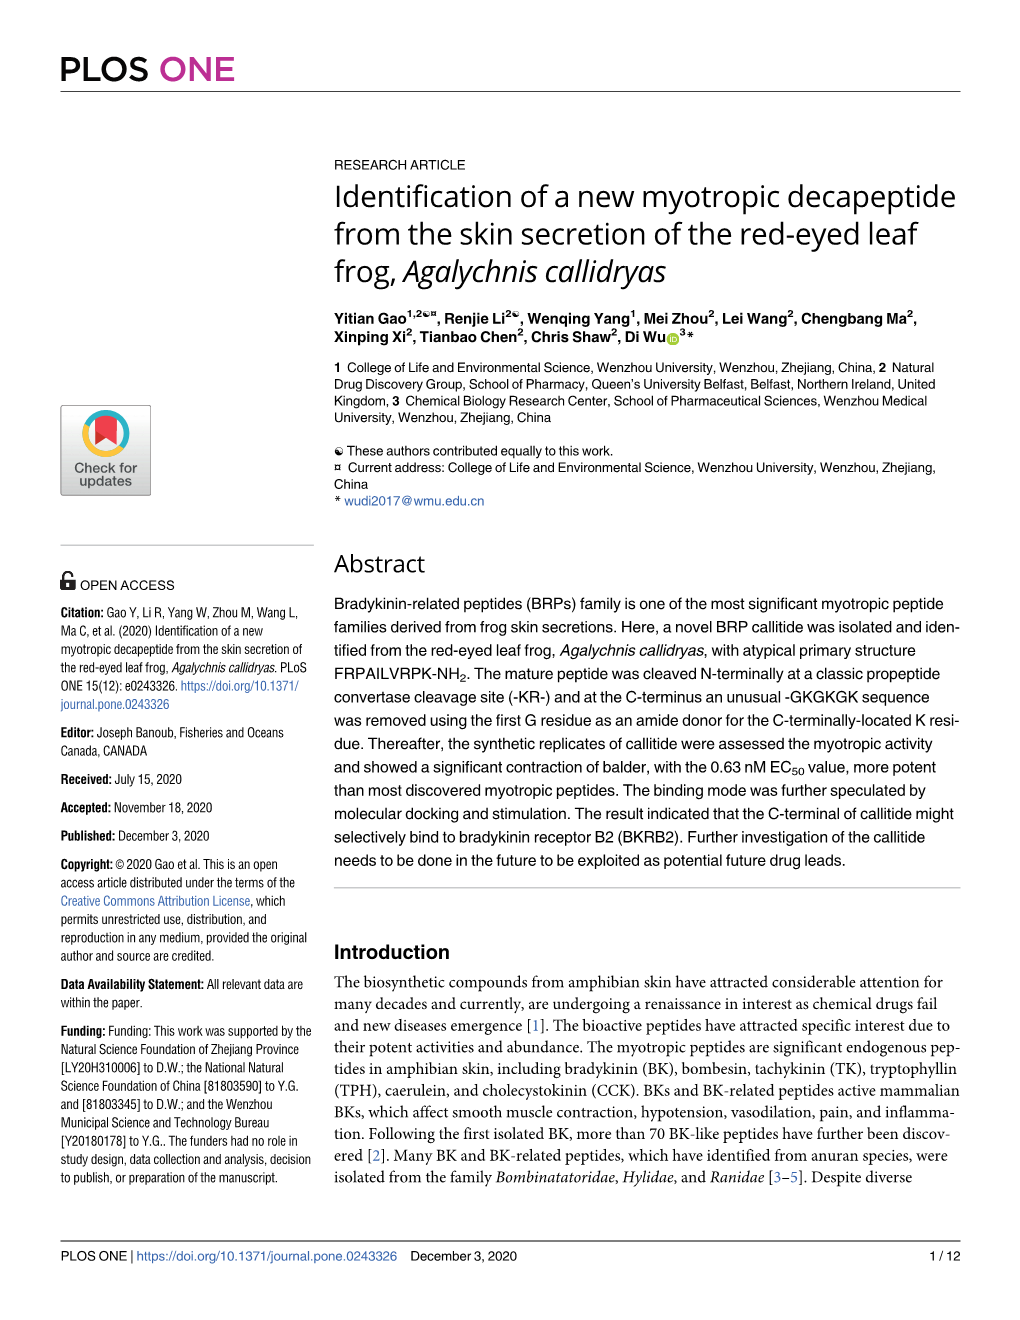 Identification of a New Myotropic Decapeptide from the Skin Secretion of the Red-Eyed Leaf Frog, Agalychnis Callidryas